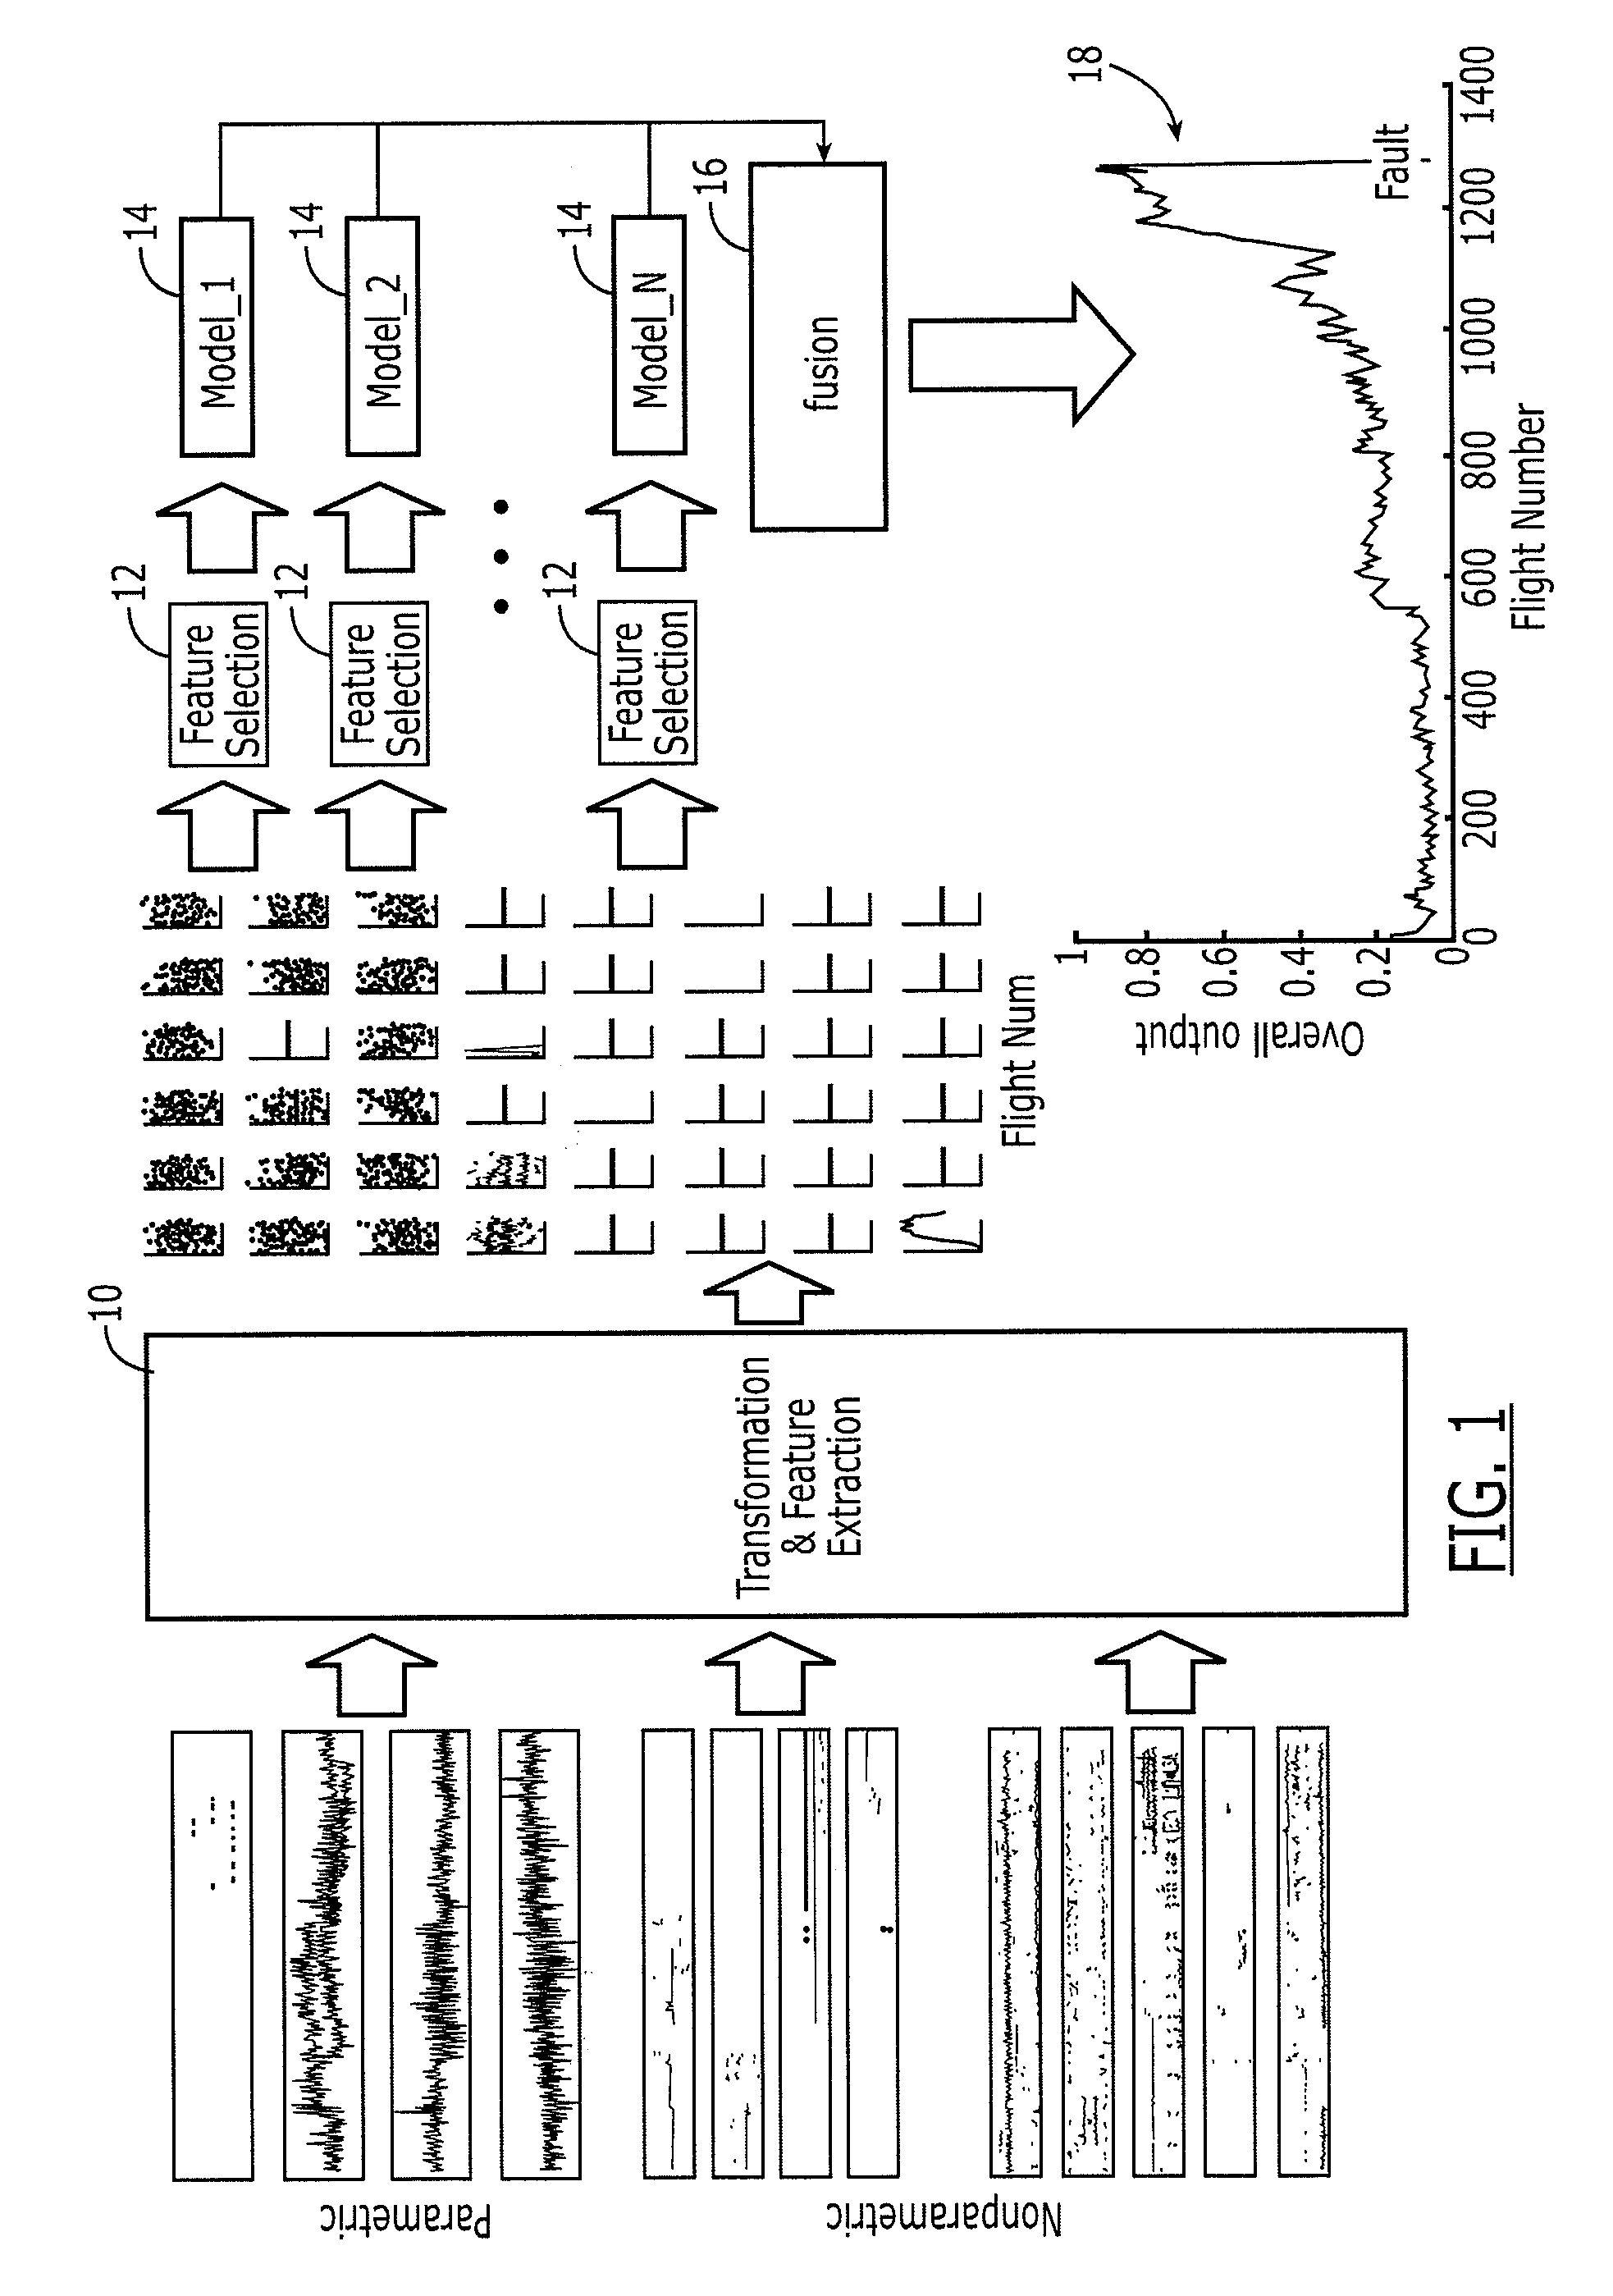 Method, Apparatus And Computer Program Product For Predicting A Fault Utilizing Multi-Resolution Classifier Fusion